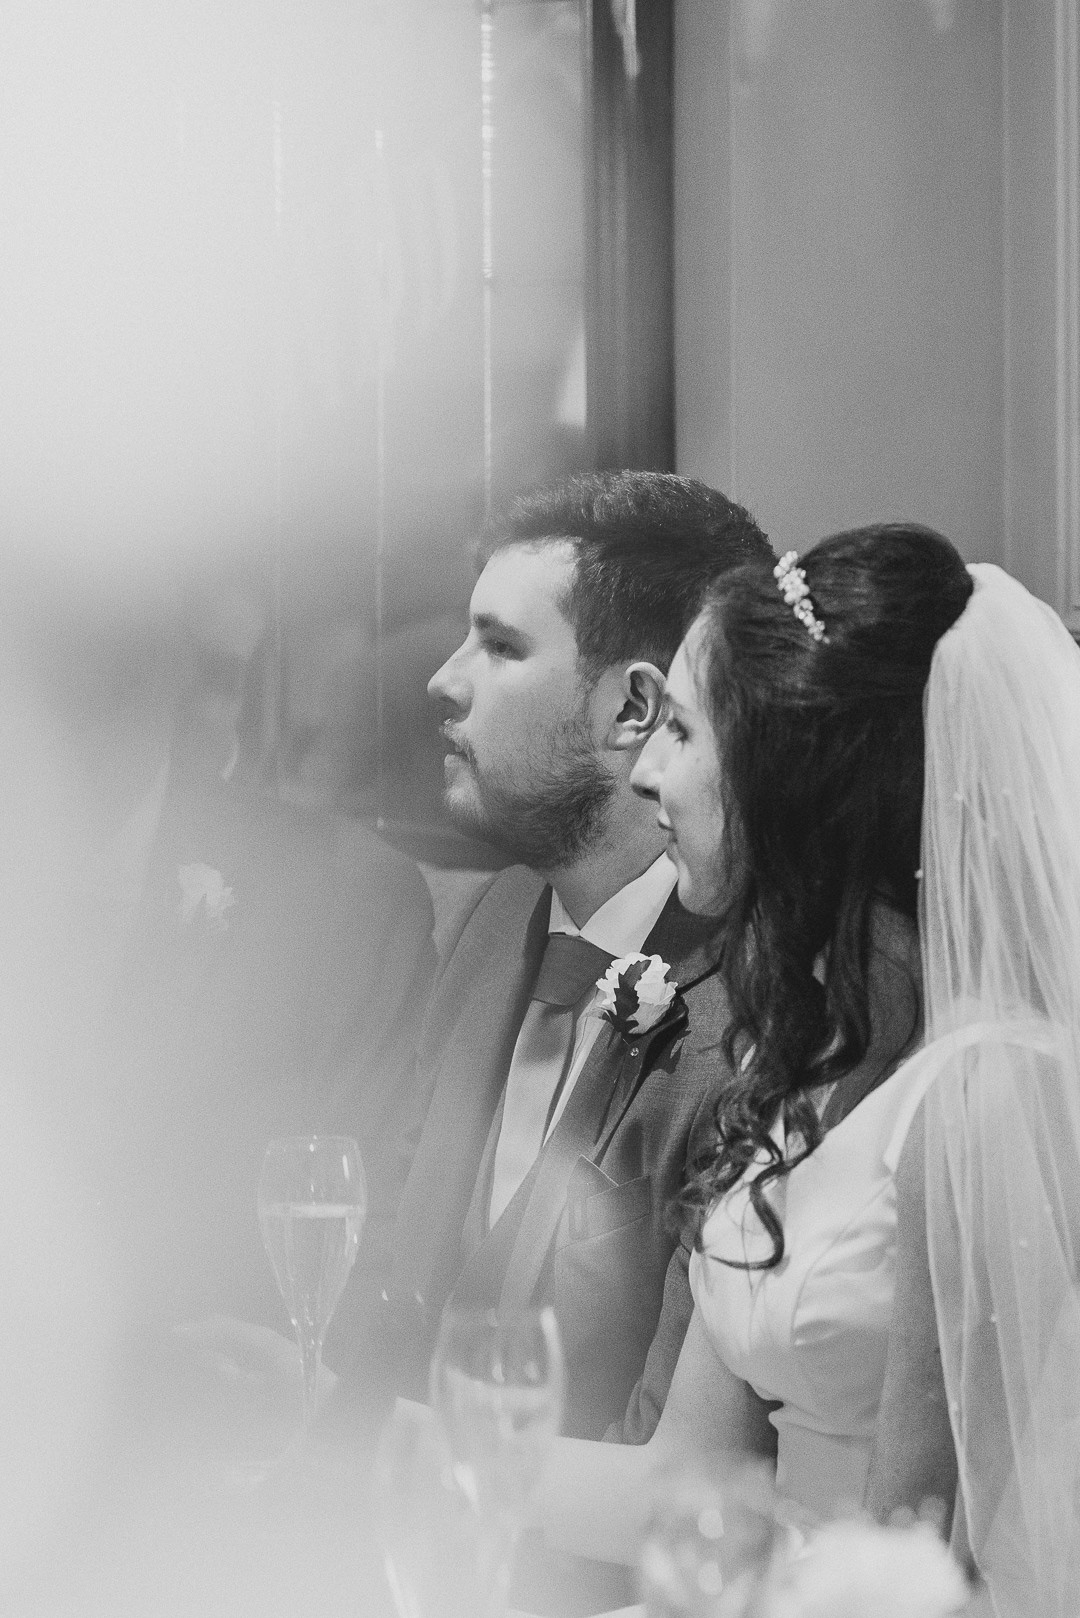 black and white photo of the bride and groom looking at someone out of the frame